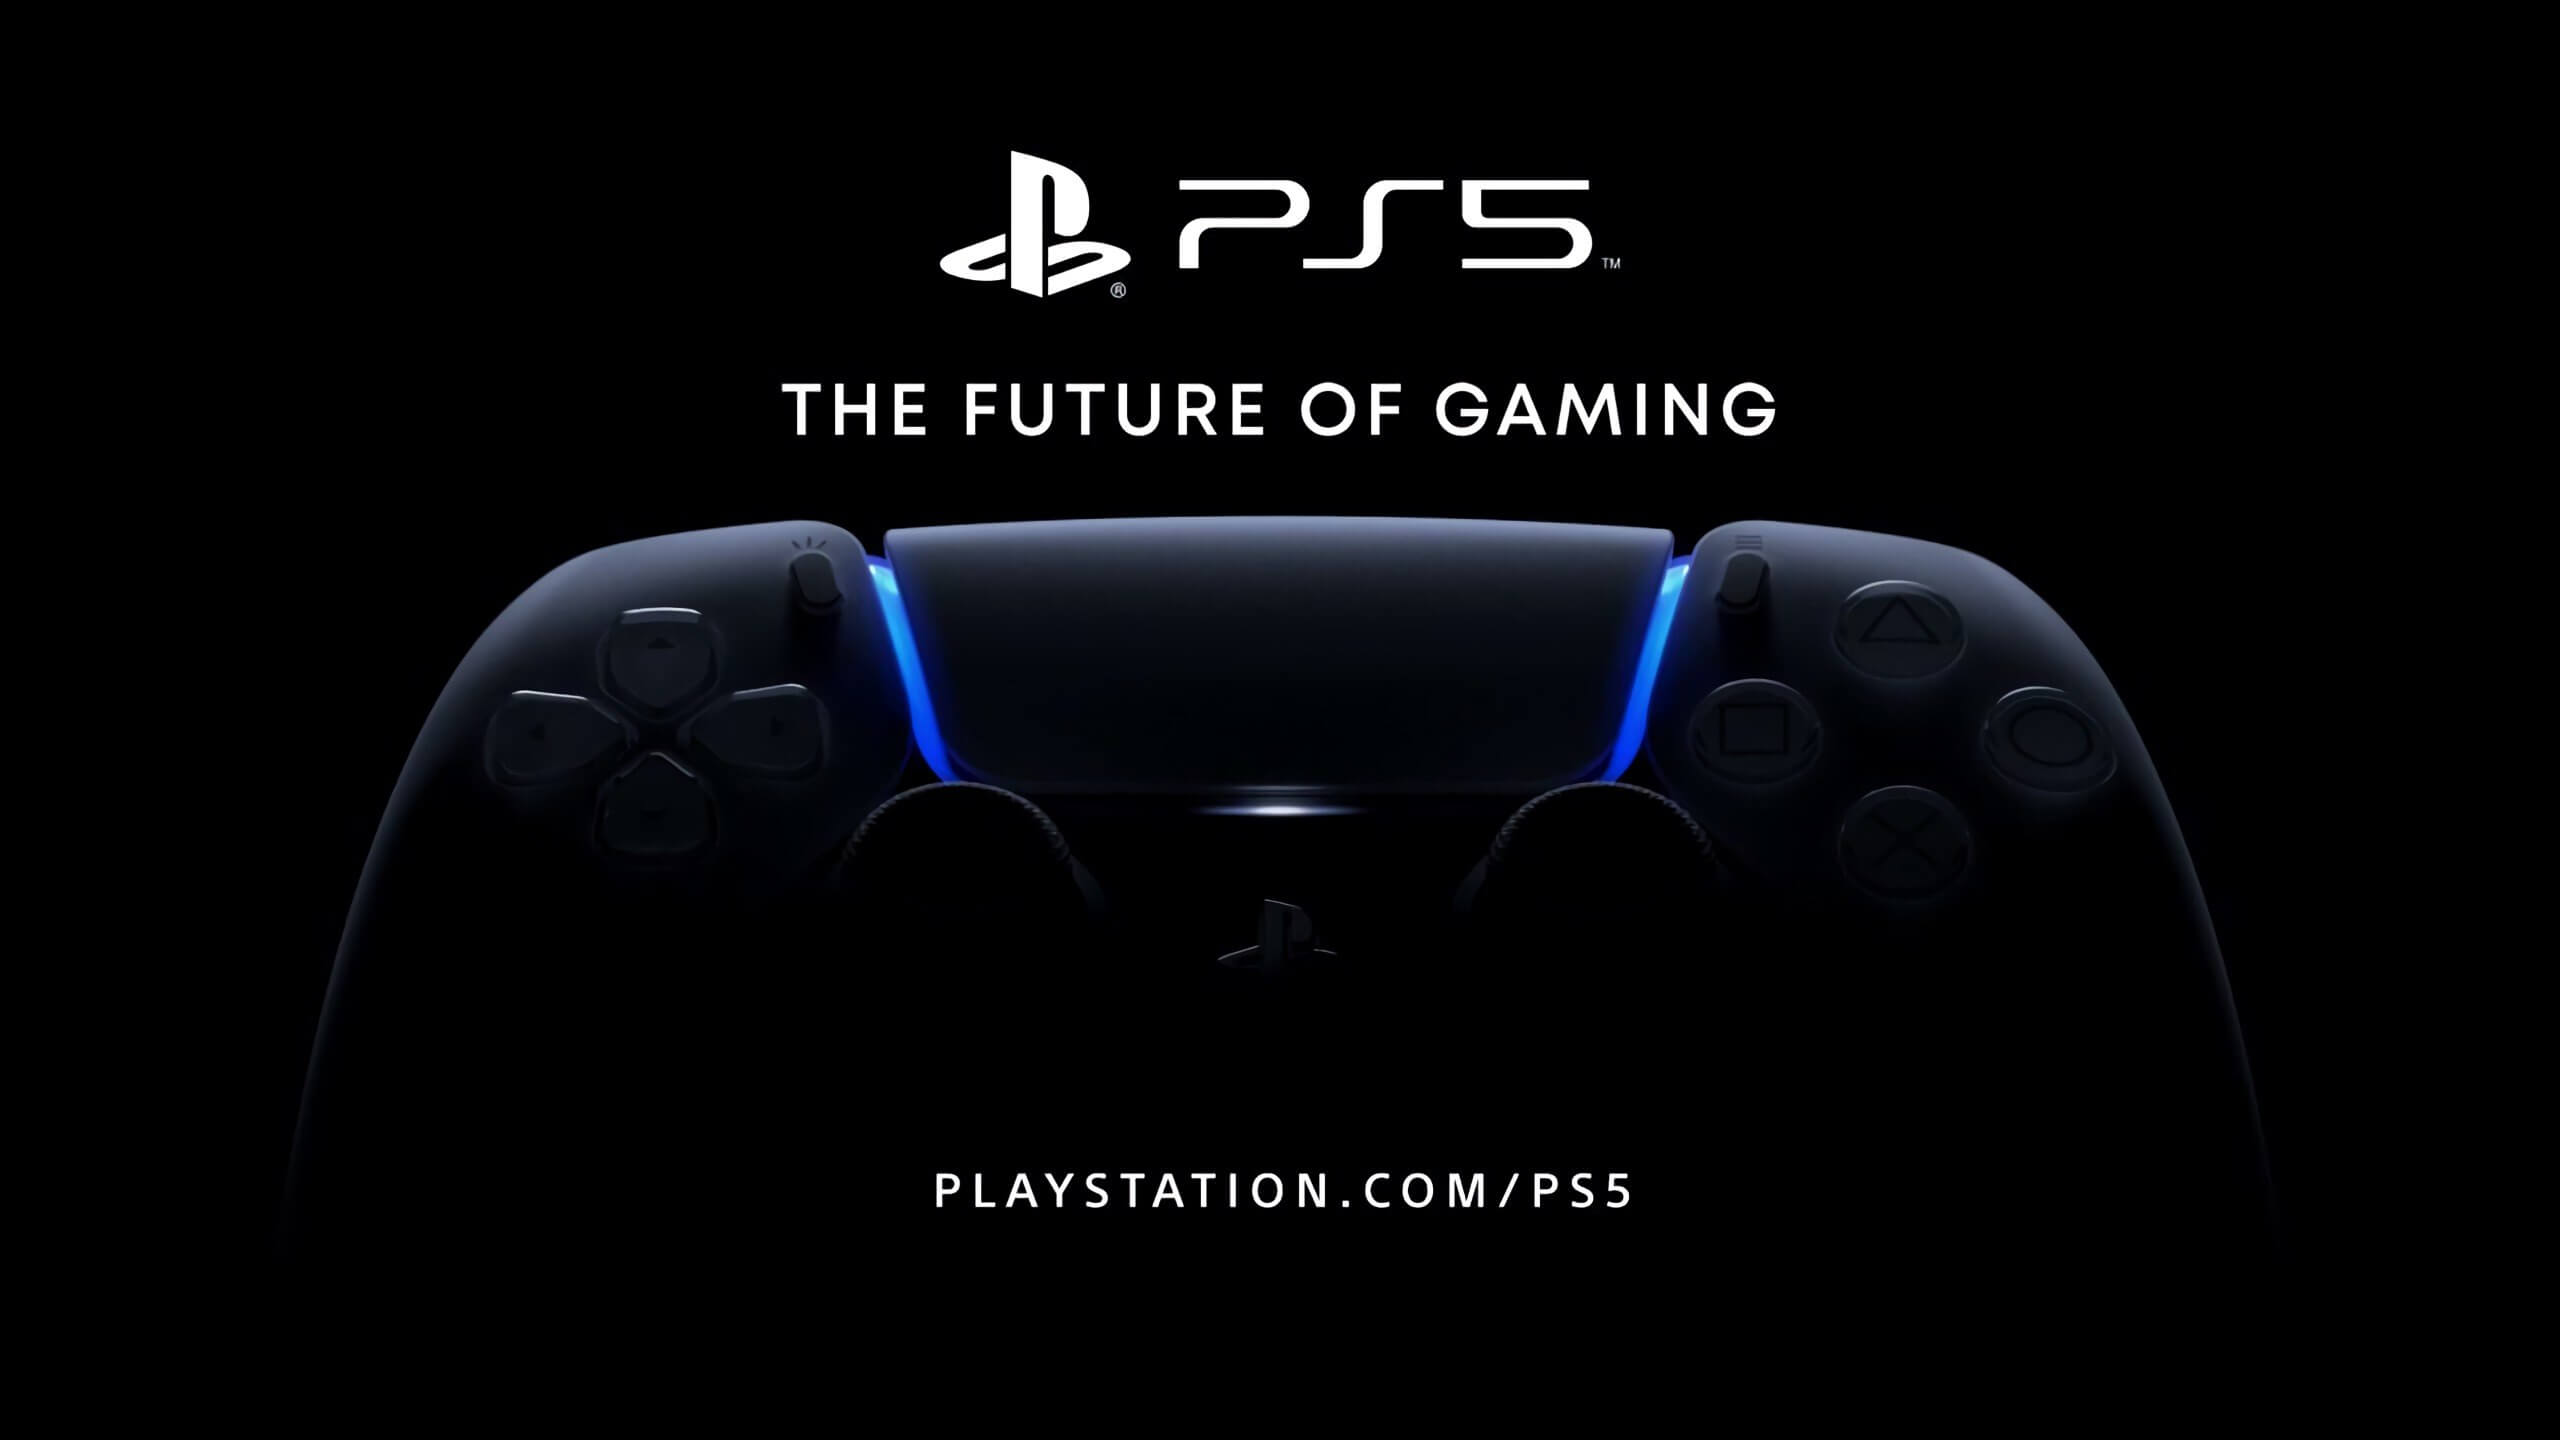 Sony's PS5 reveal event is set for later this week